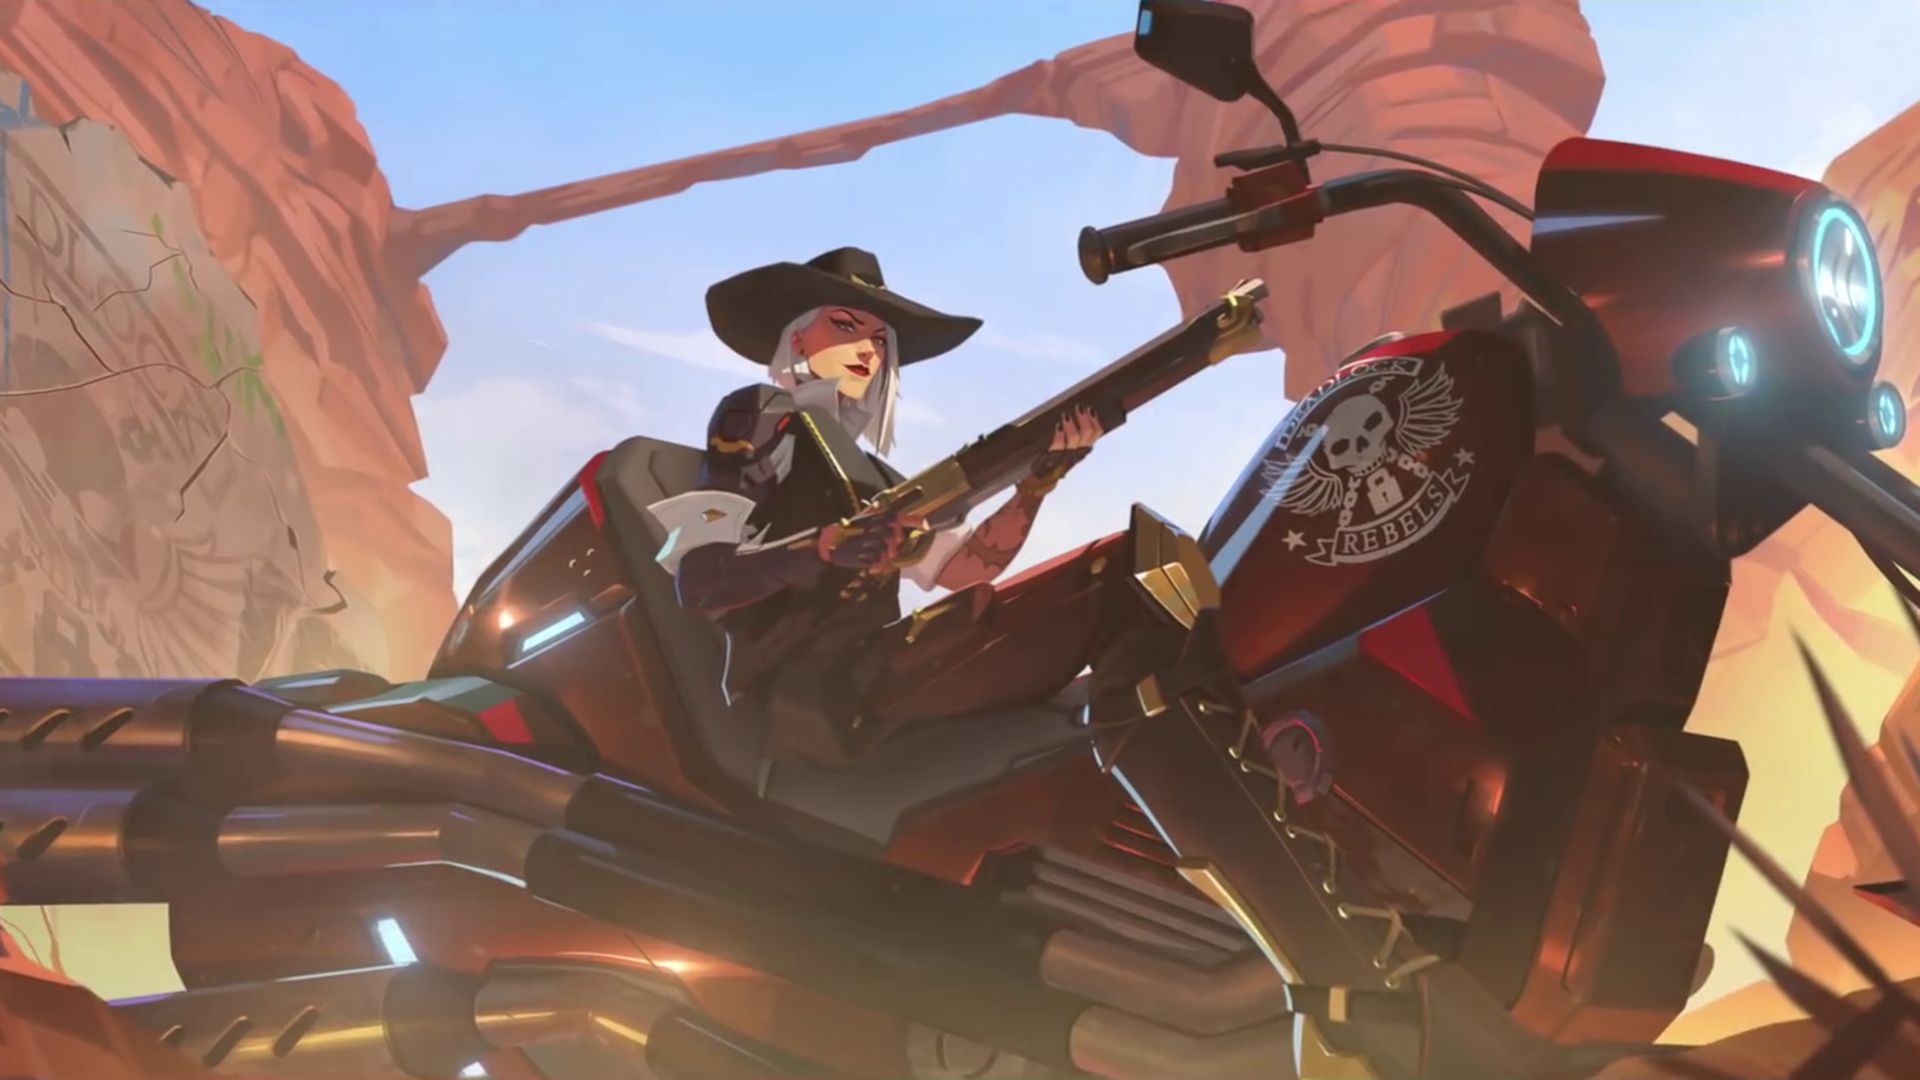 393562 ashe, lol, league of legends, 4k, pc - Rare Gallery HD Wallpapers